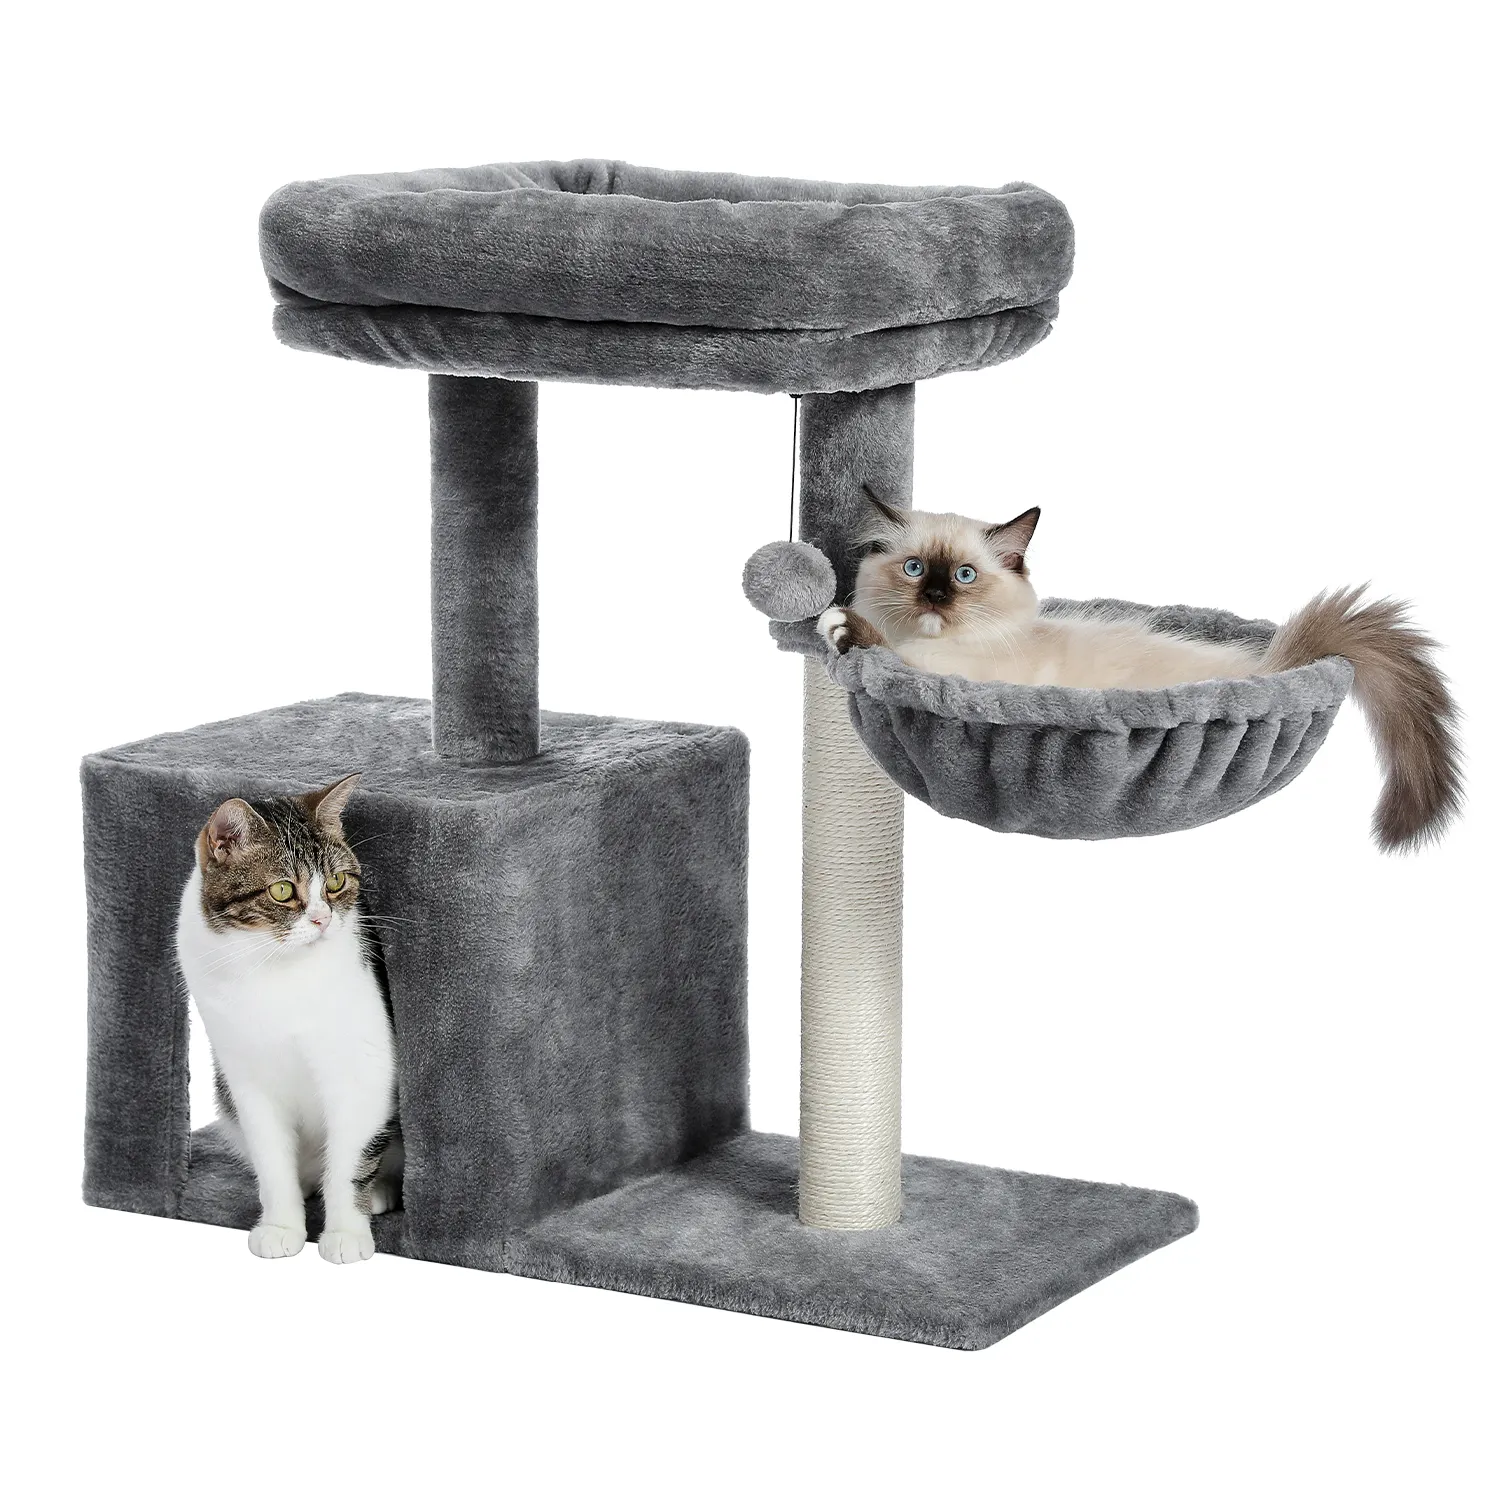 H70cm Cat Tree Condo with Natural Sisal-Covered Scratching Posts for Active Cat Indoor Kitten Large Top Perch Cozy Hummock House